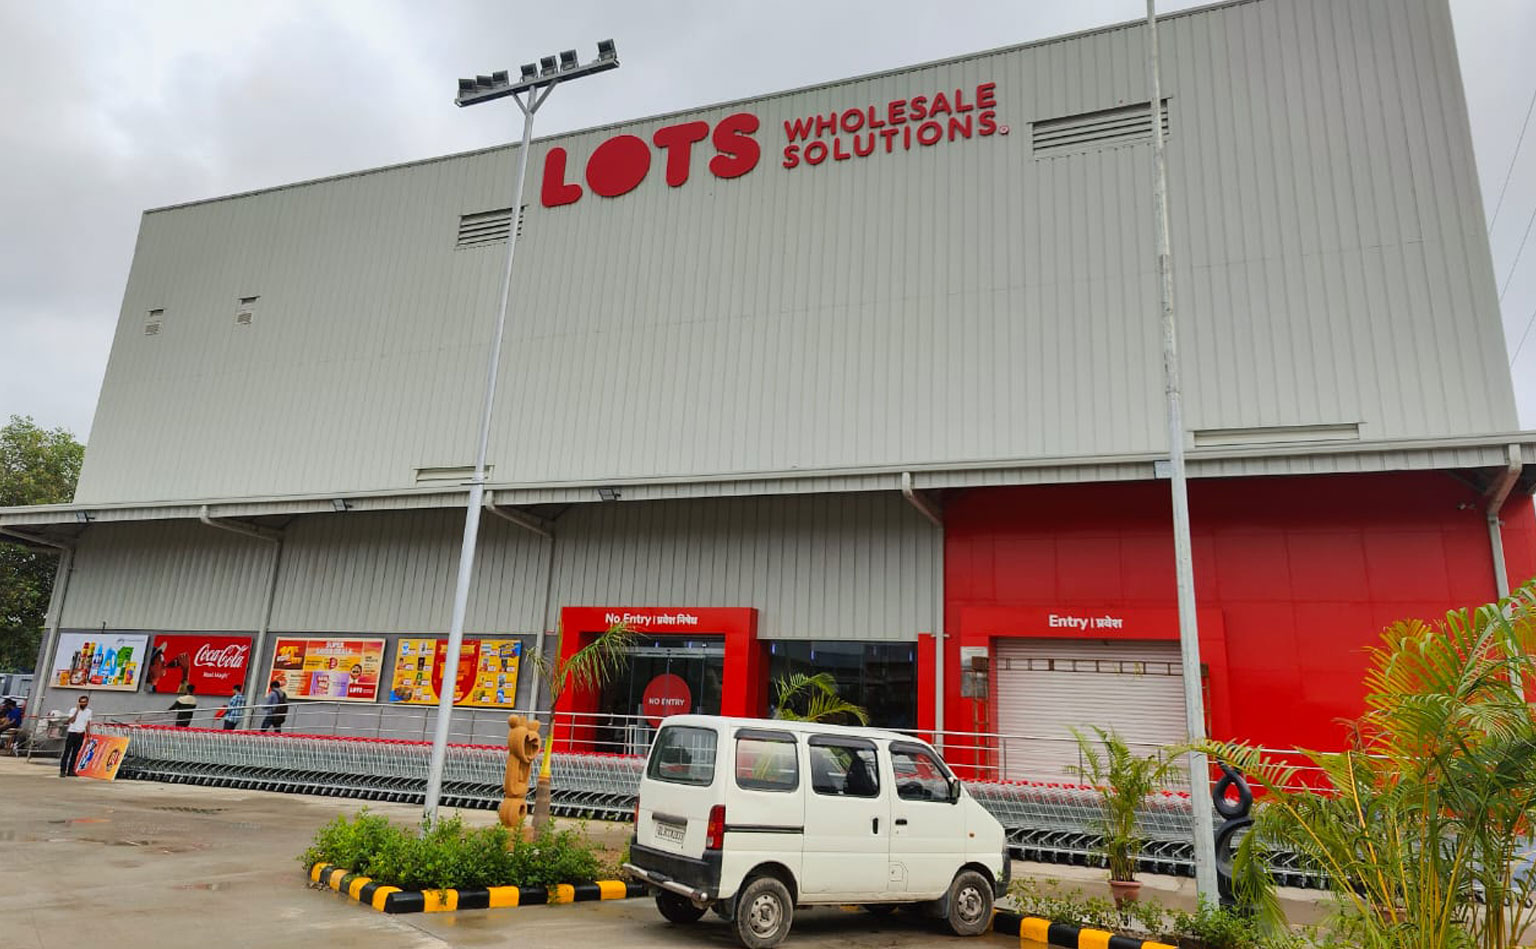 LOTS Wholesale Solutions expands presence in north India; launches ‘first standalone’ store in Delhi/NCR